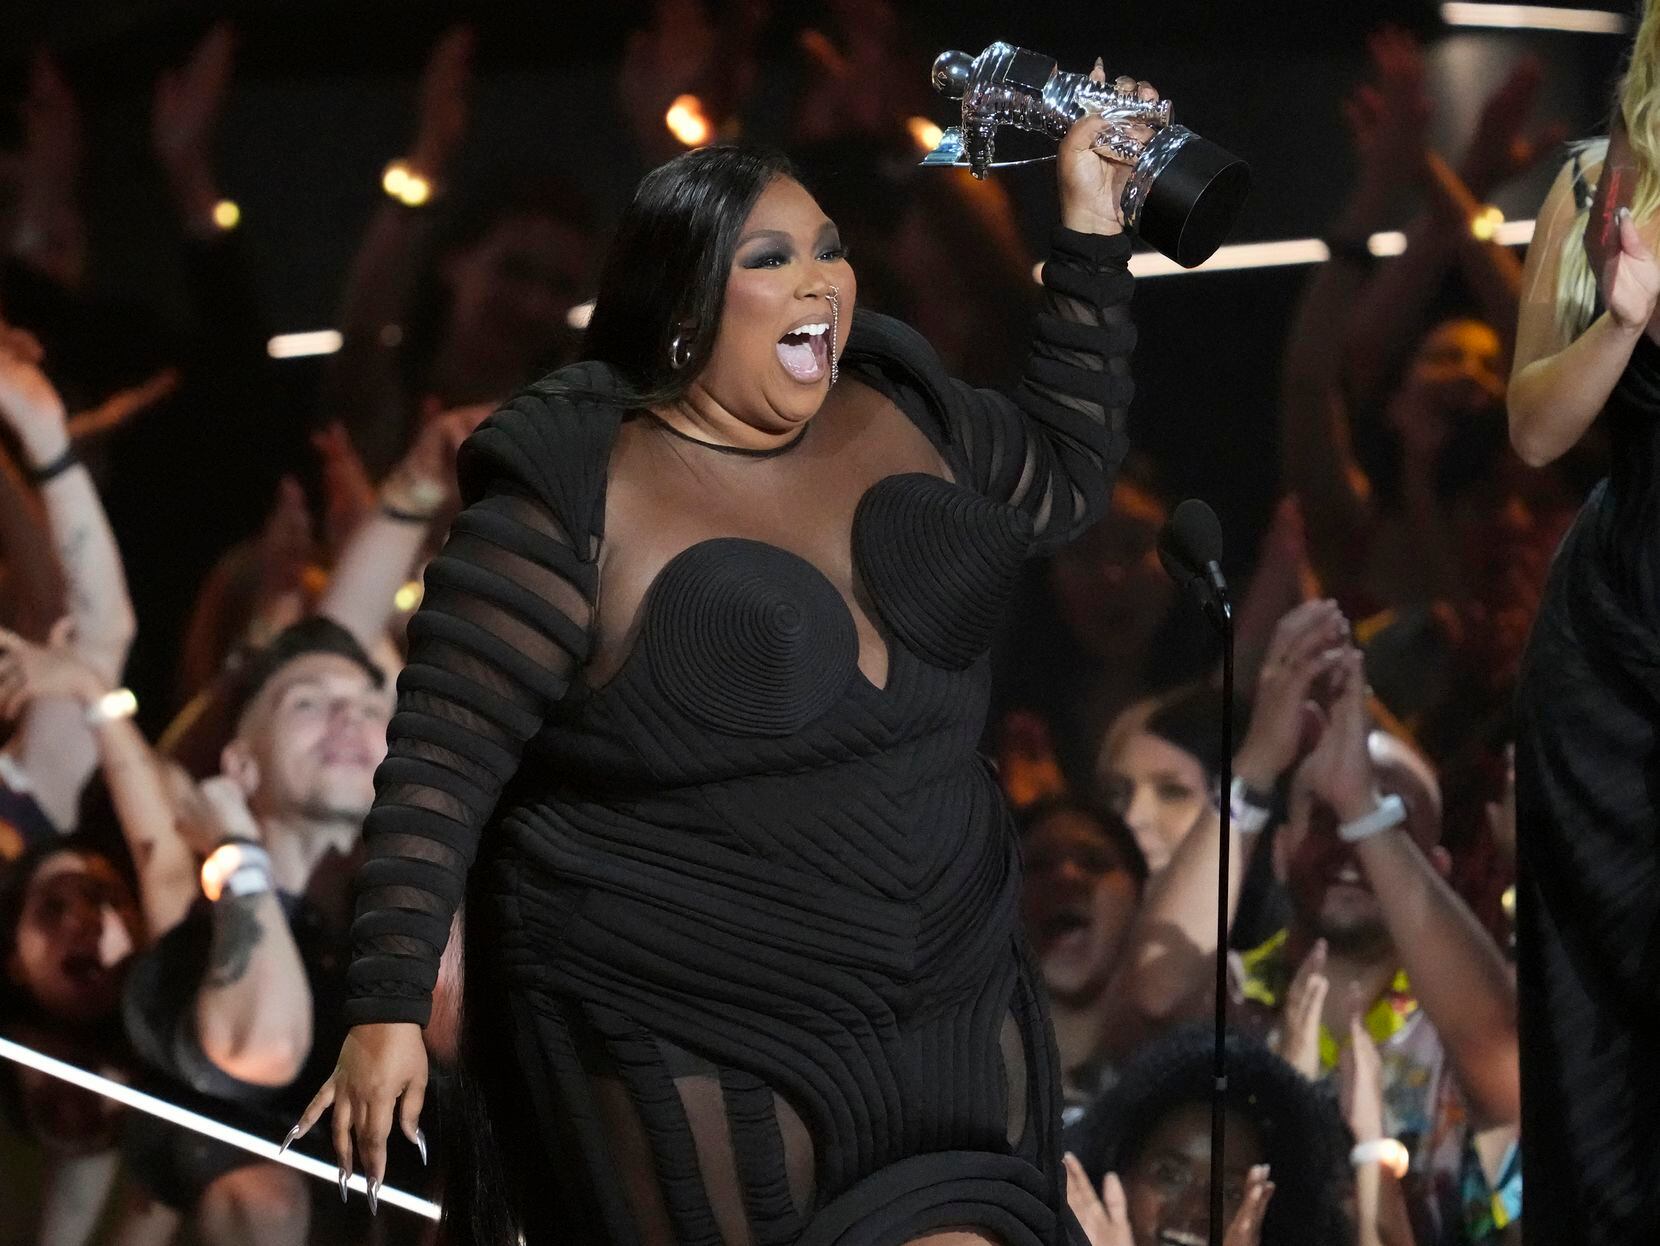 Lizzo accepts the video for good award for "About Damn Time" at the MTV Video Music Awards...